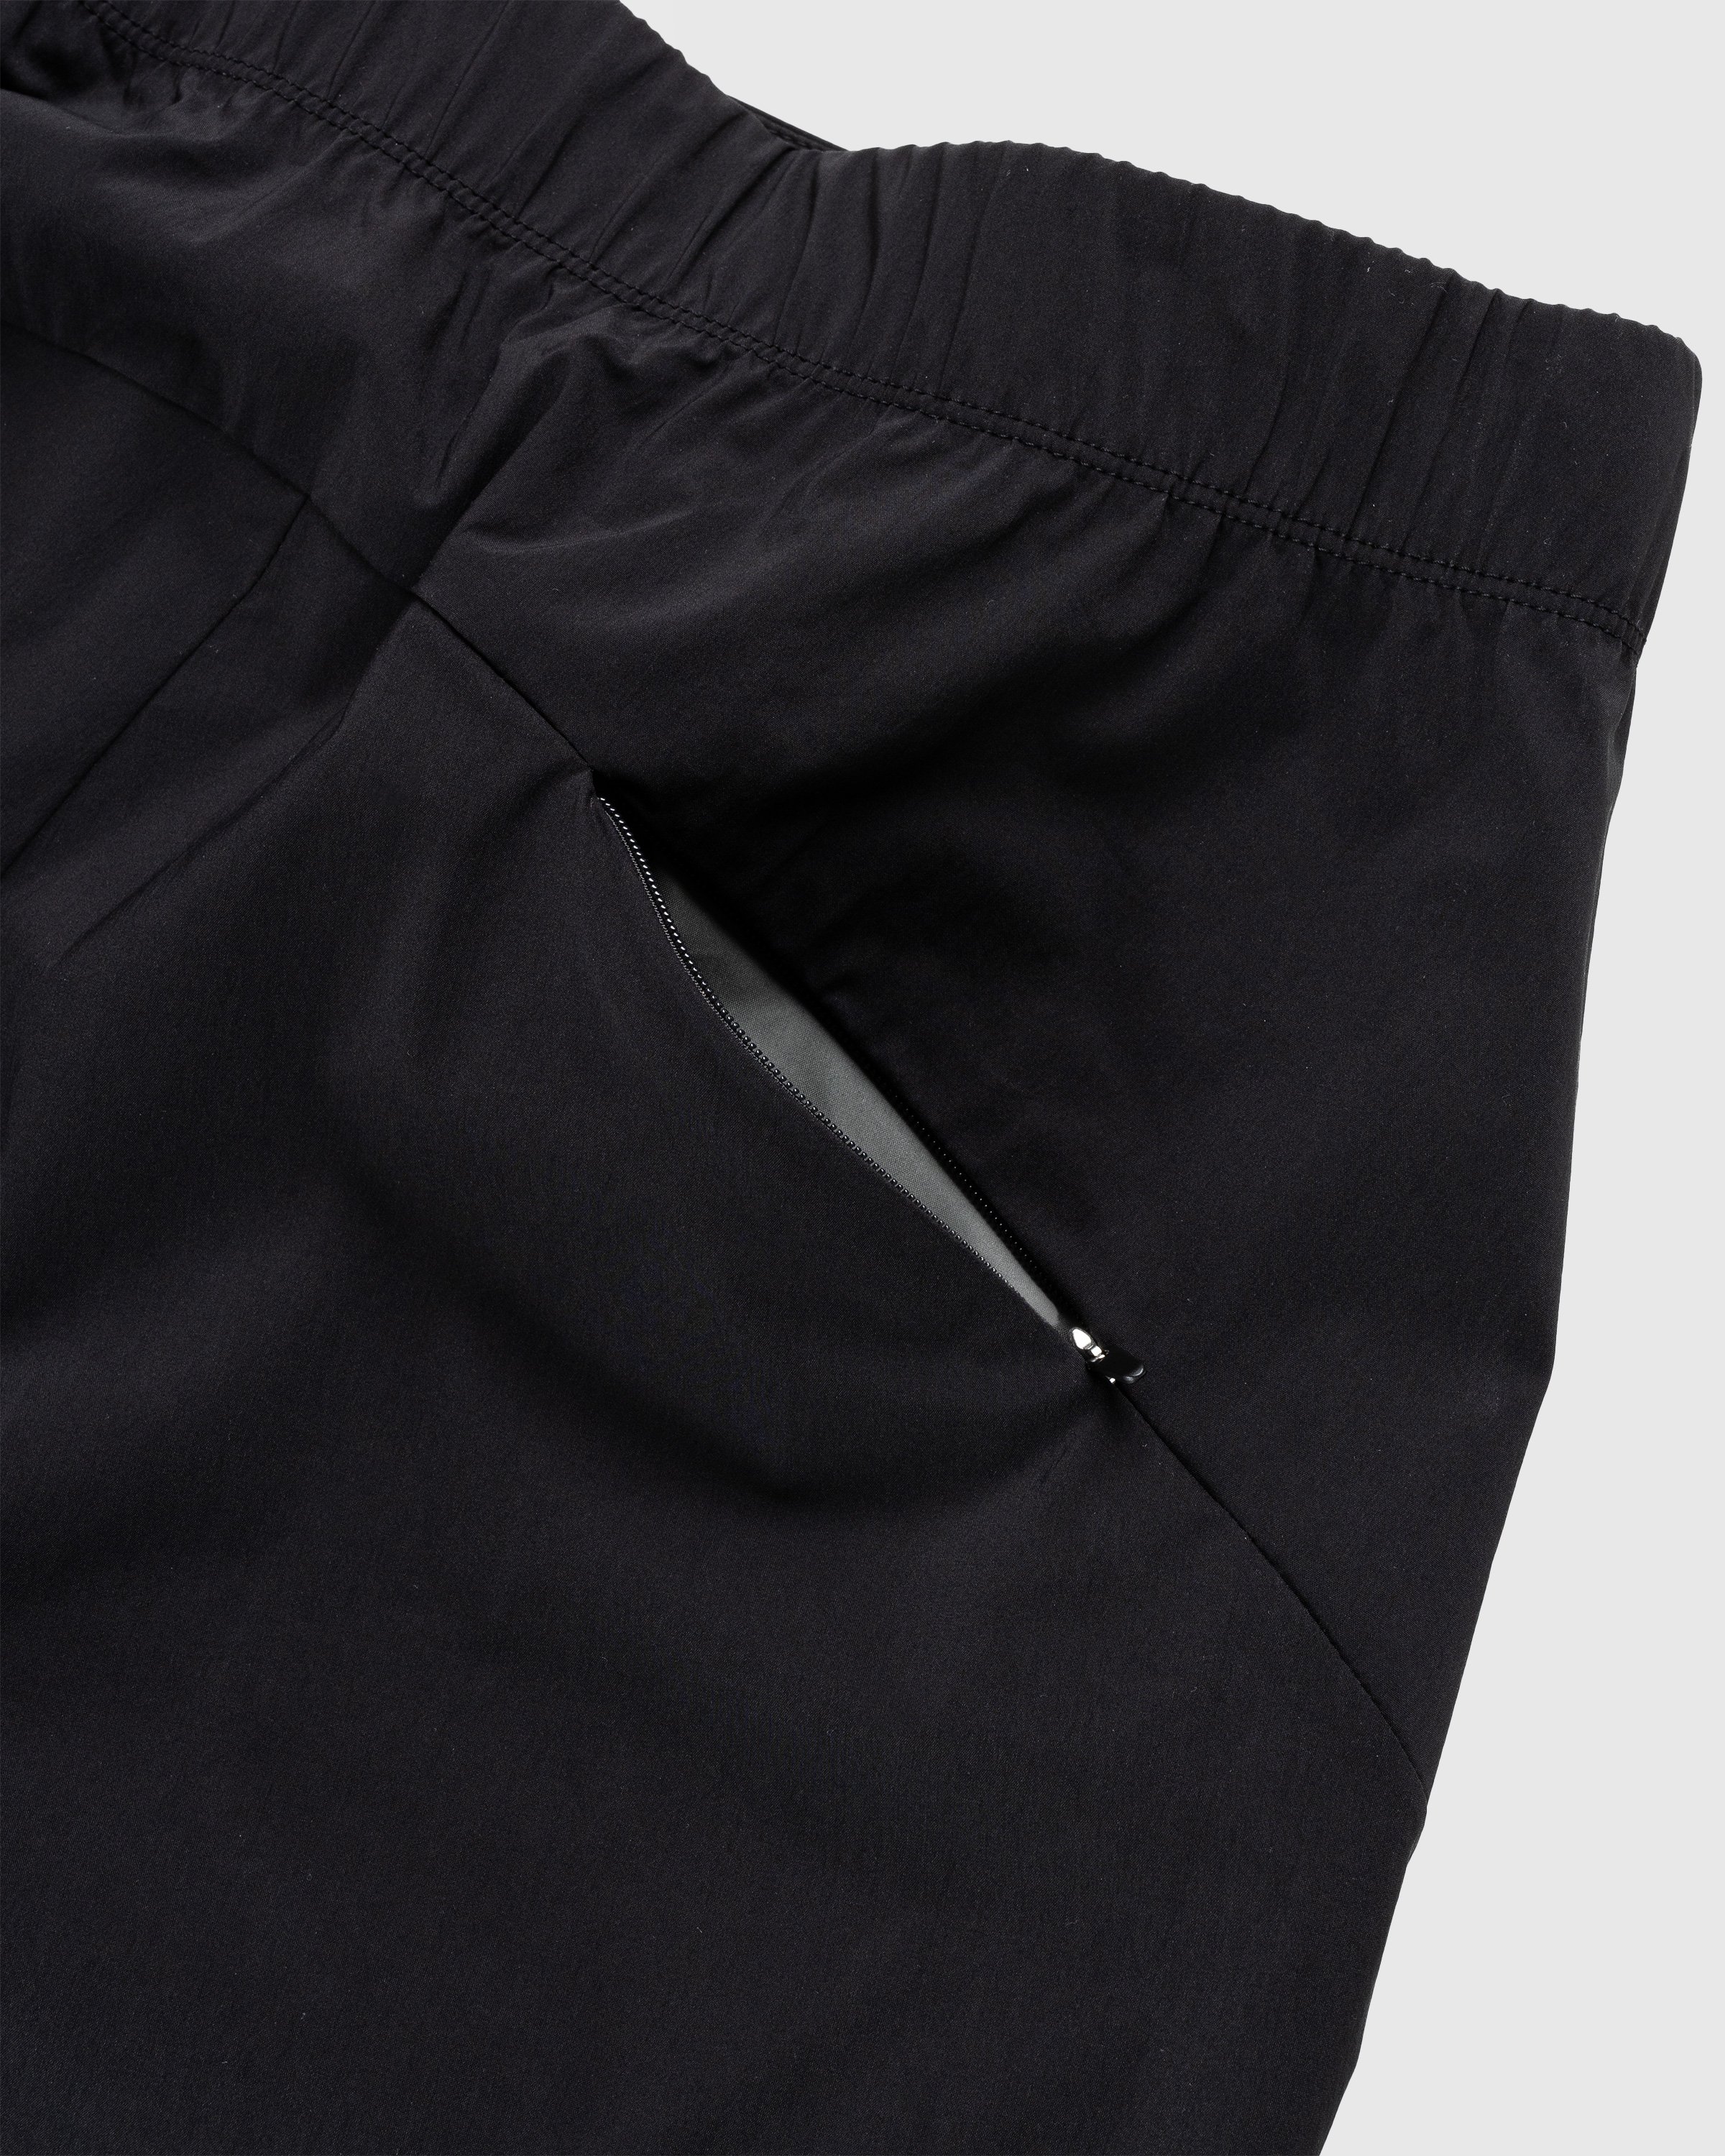 Post Archive Faction (PAF) - 5.0+ Technical Pants Right Black - Clothing - Black - Image 4